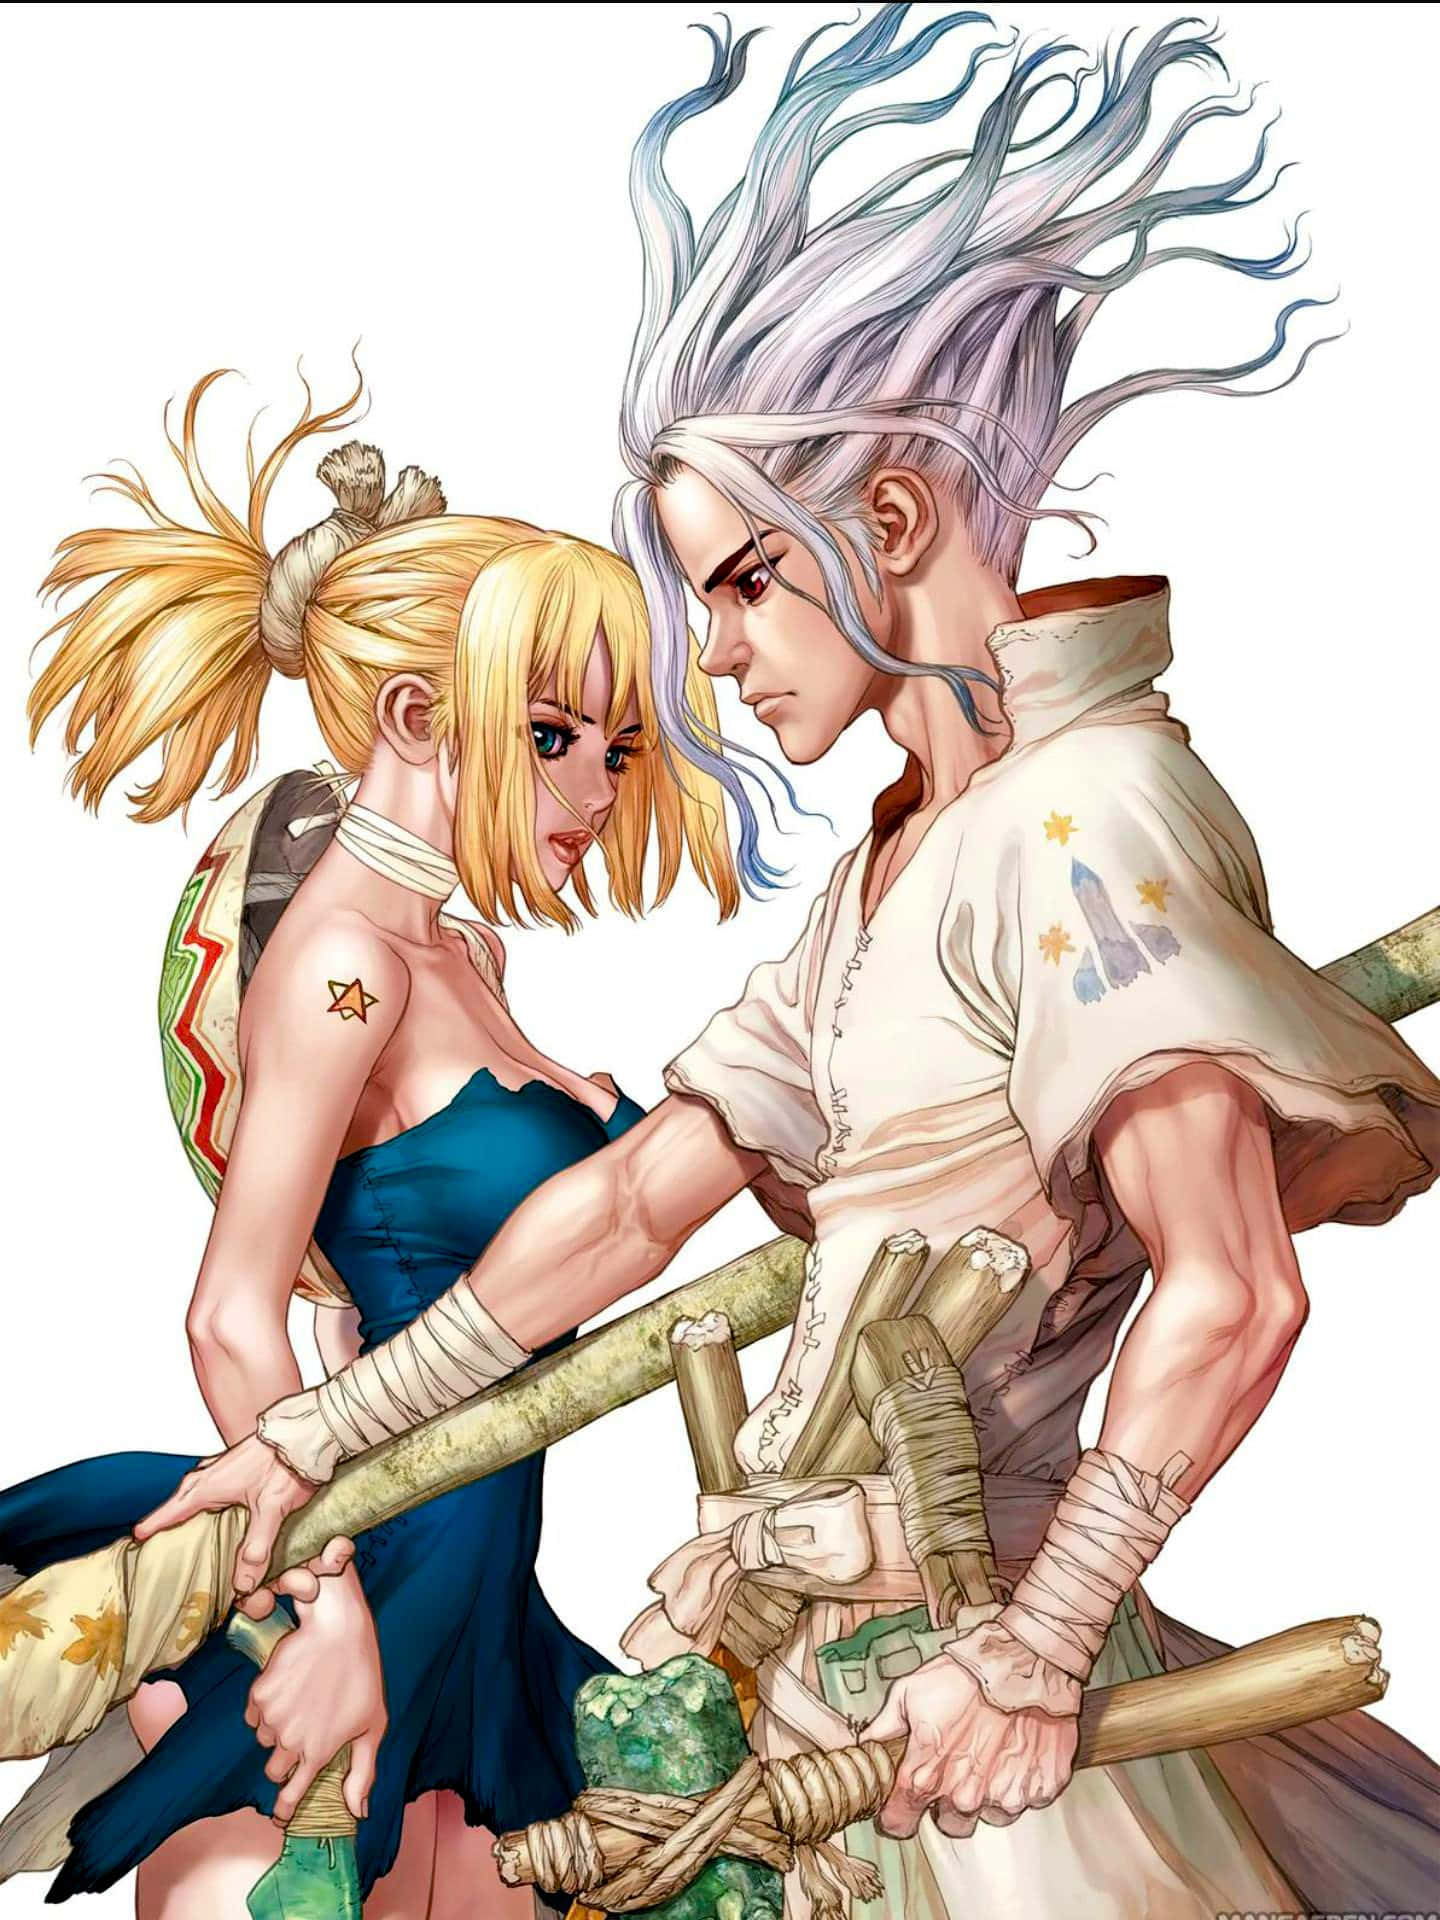 "Explore the World of Petrification in Dr Stone"